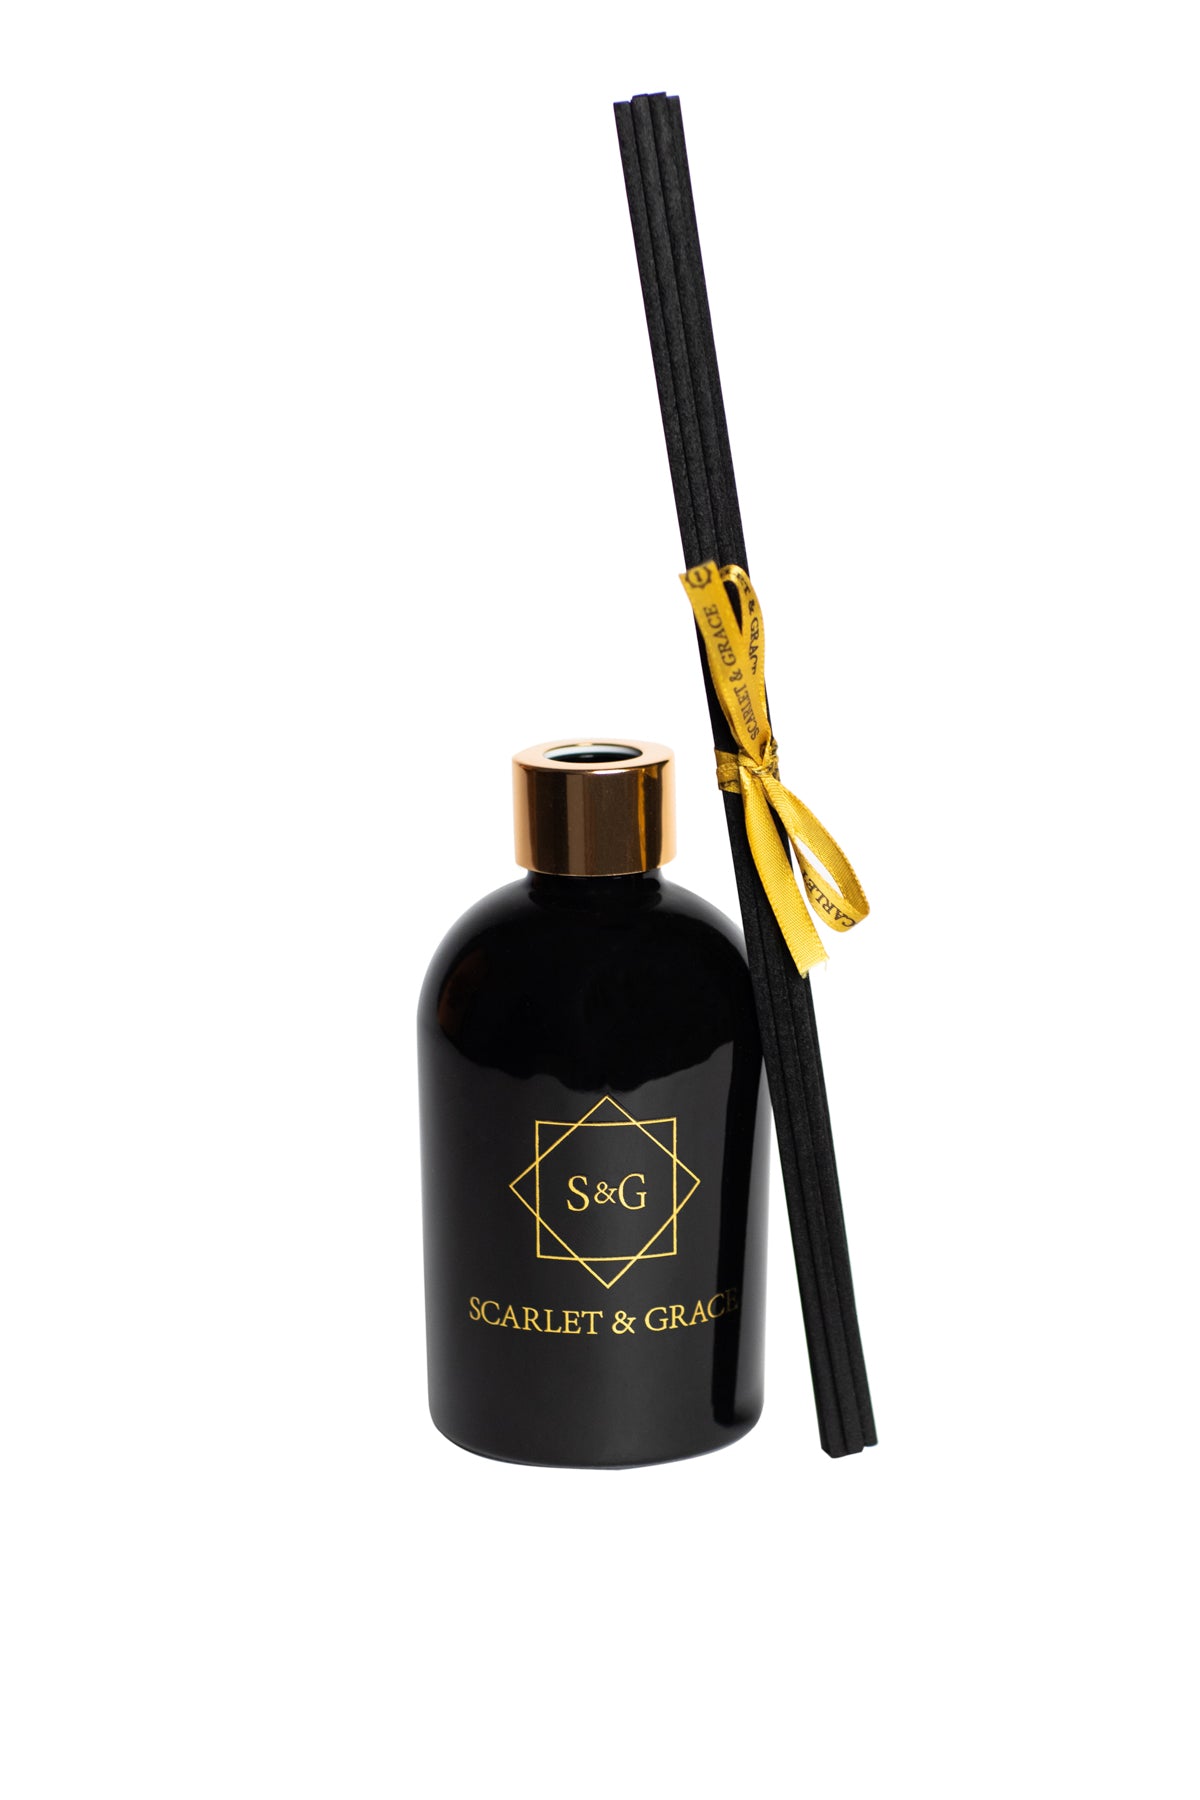 Wines of Gippsland - 225ml Reed Diffuser - Scarlet & Grace